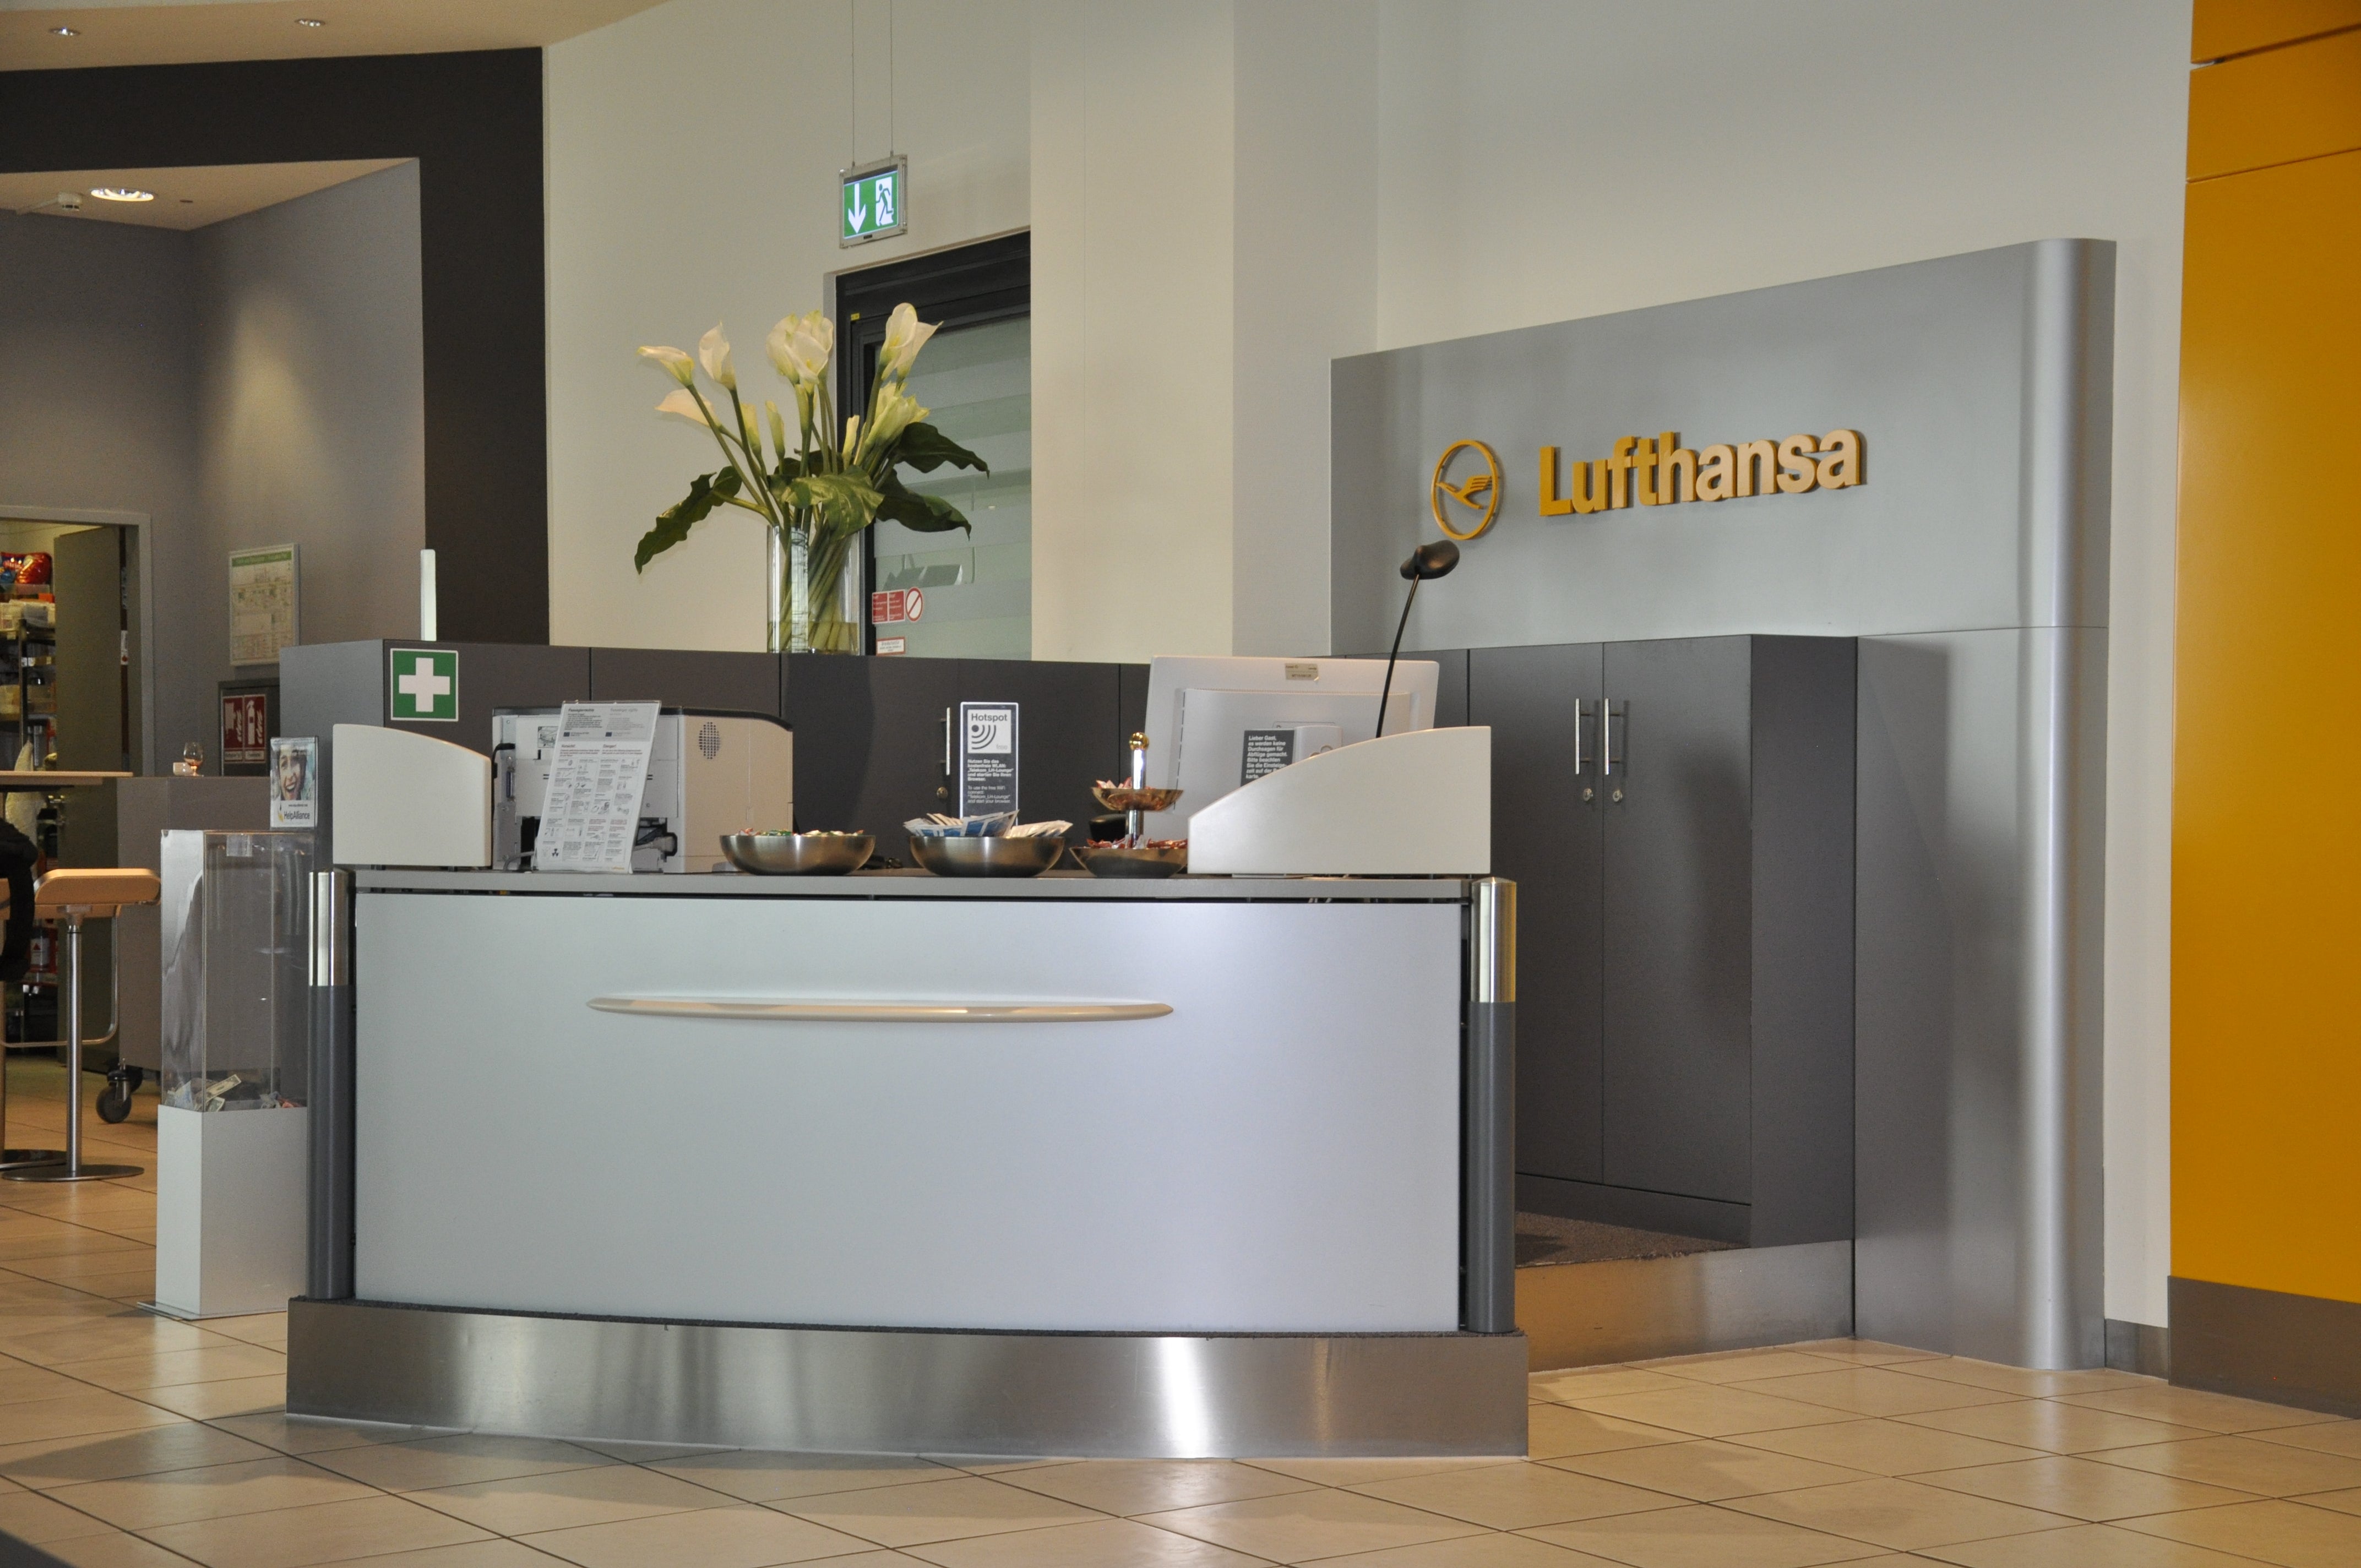 Unmanned desk inside the Lufthansa Business Lounge, FRA Concourse C